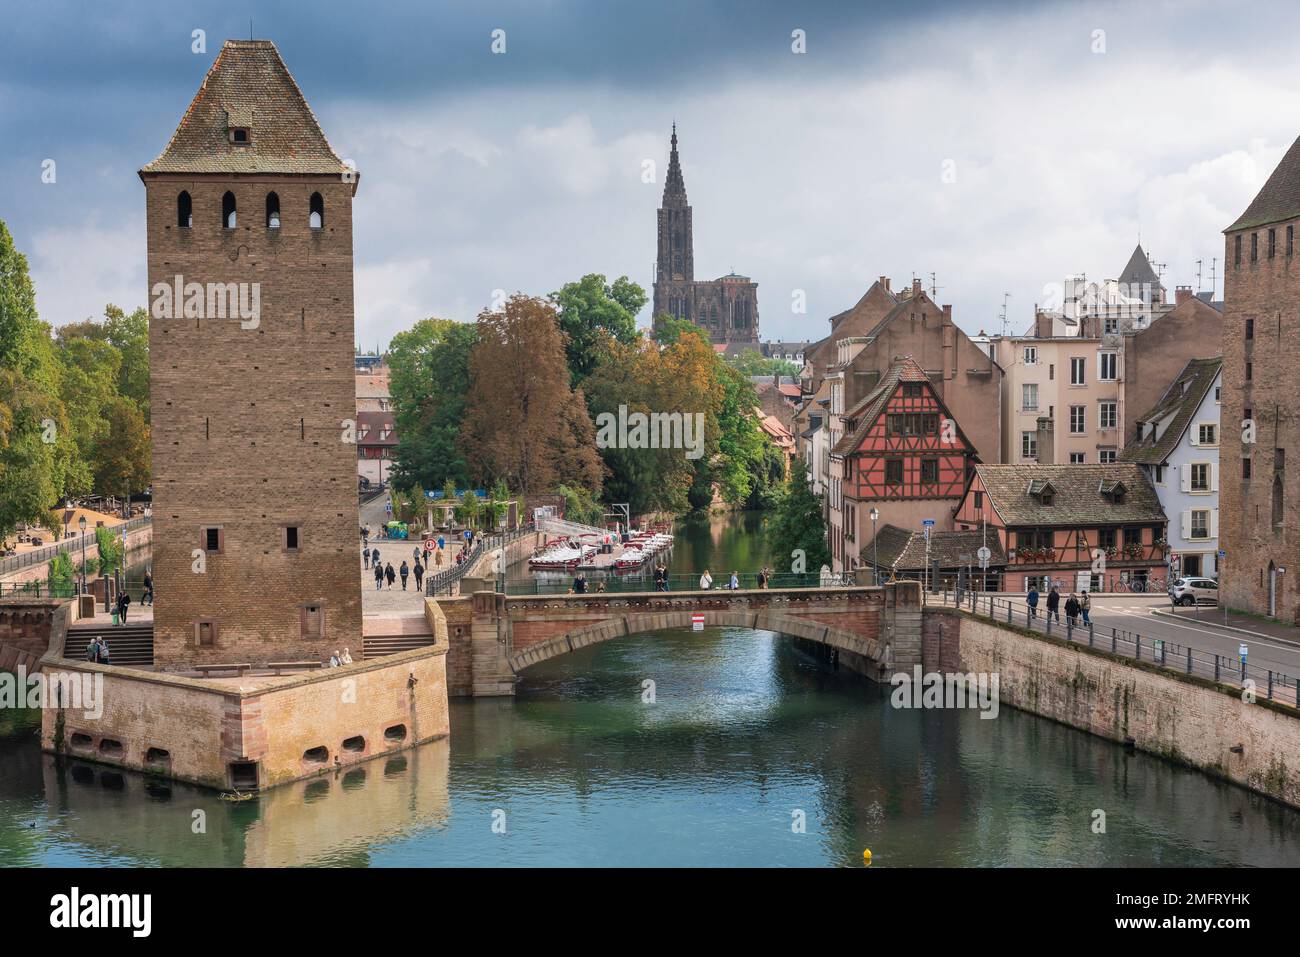 Strasbourg city center, view of the historic Ponts Couverts spanning the River Ill in the historic Old Town quarter of Strasbourg, Alsace, France Stock Photo